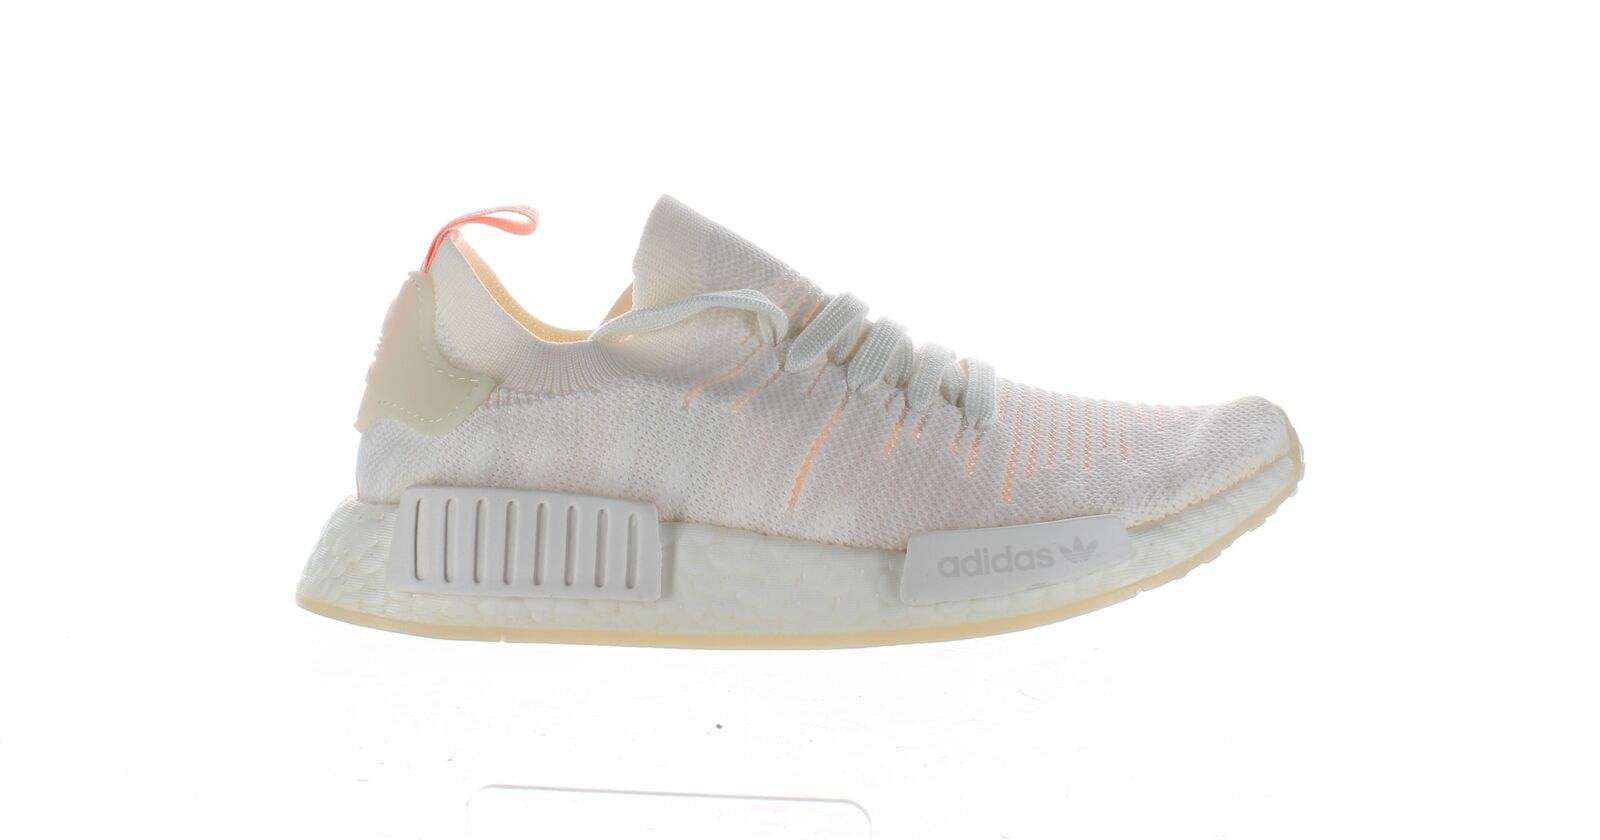 Adidas Womens Nmd R1 Cloud White/Clear Orange Running Shoes Size 6 (2269668)